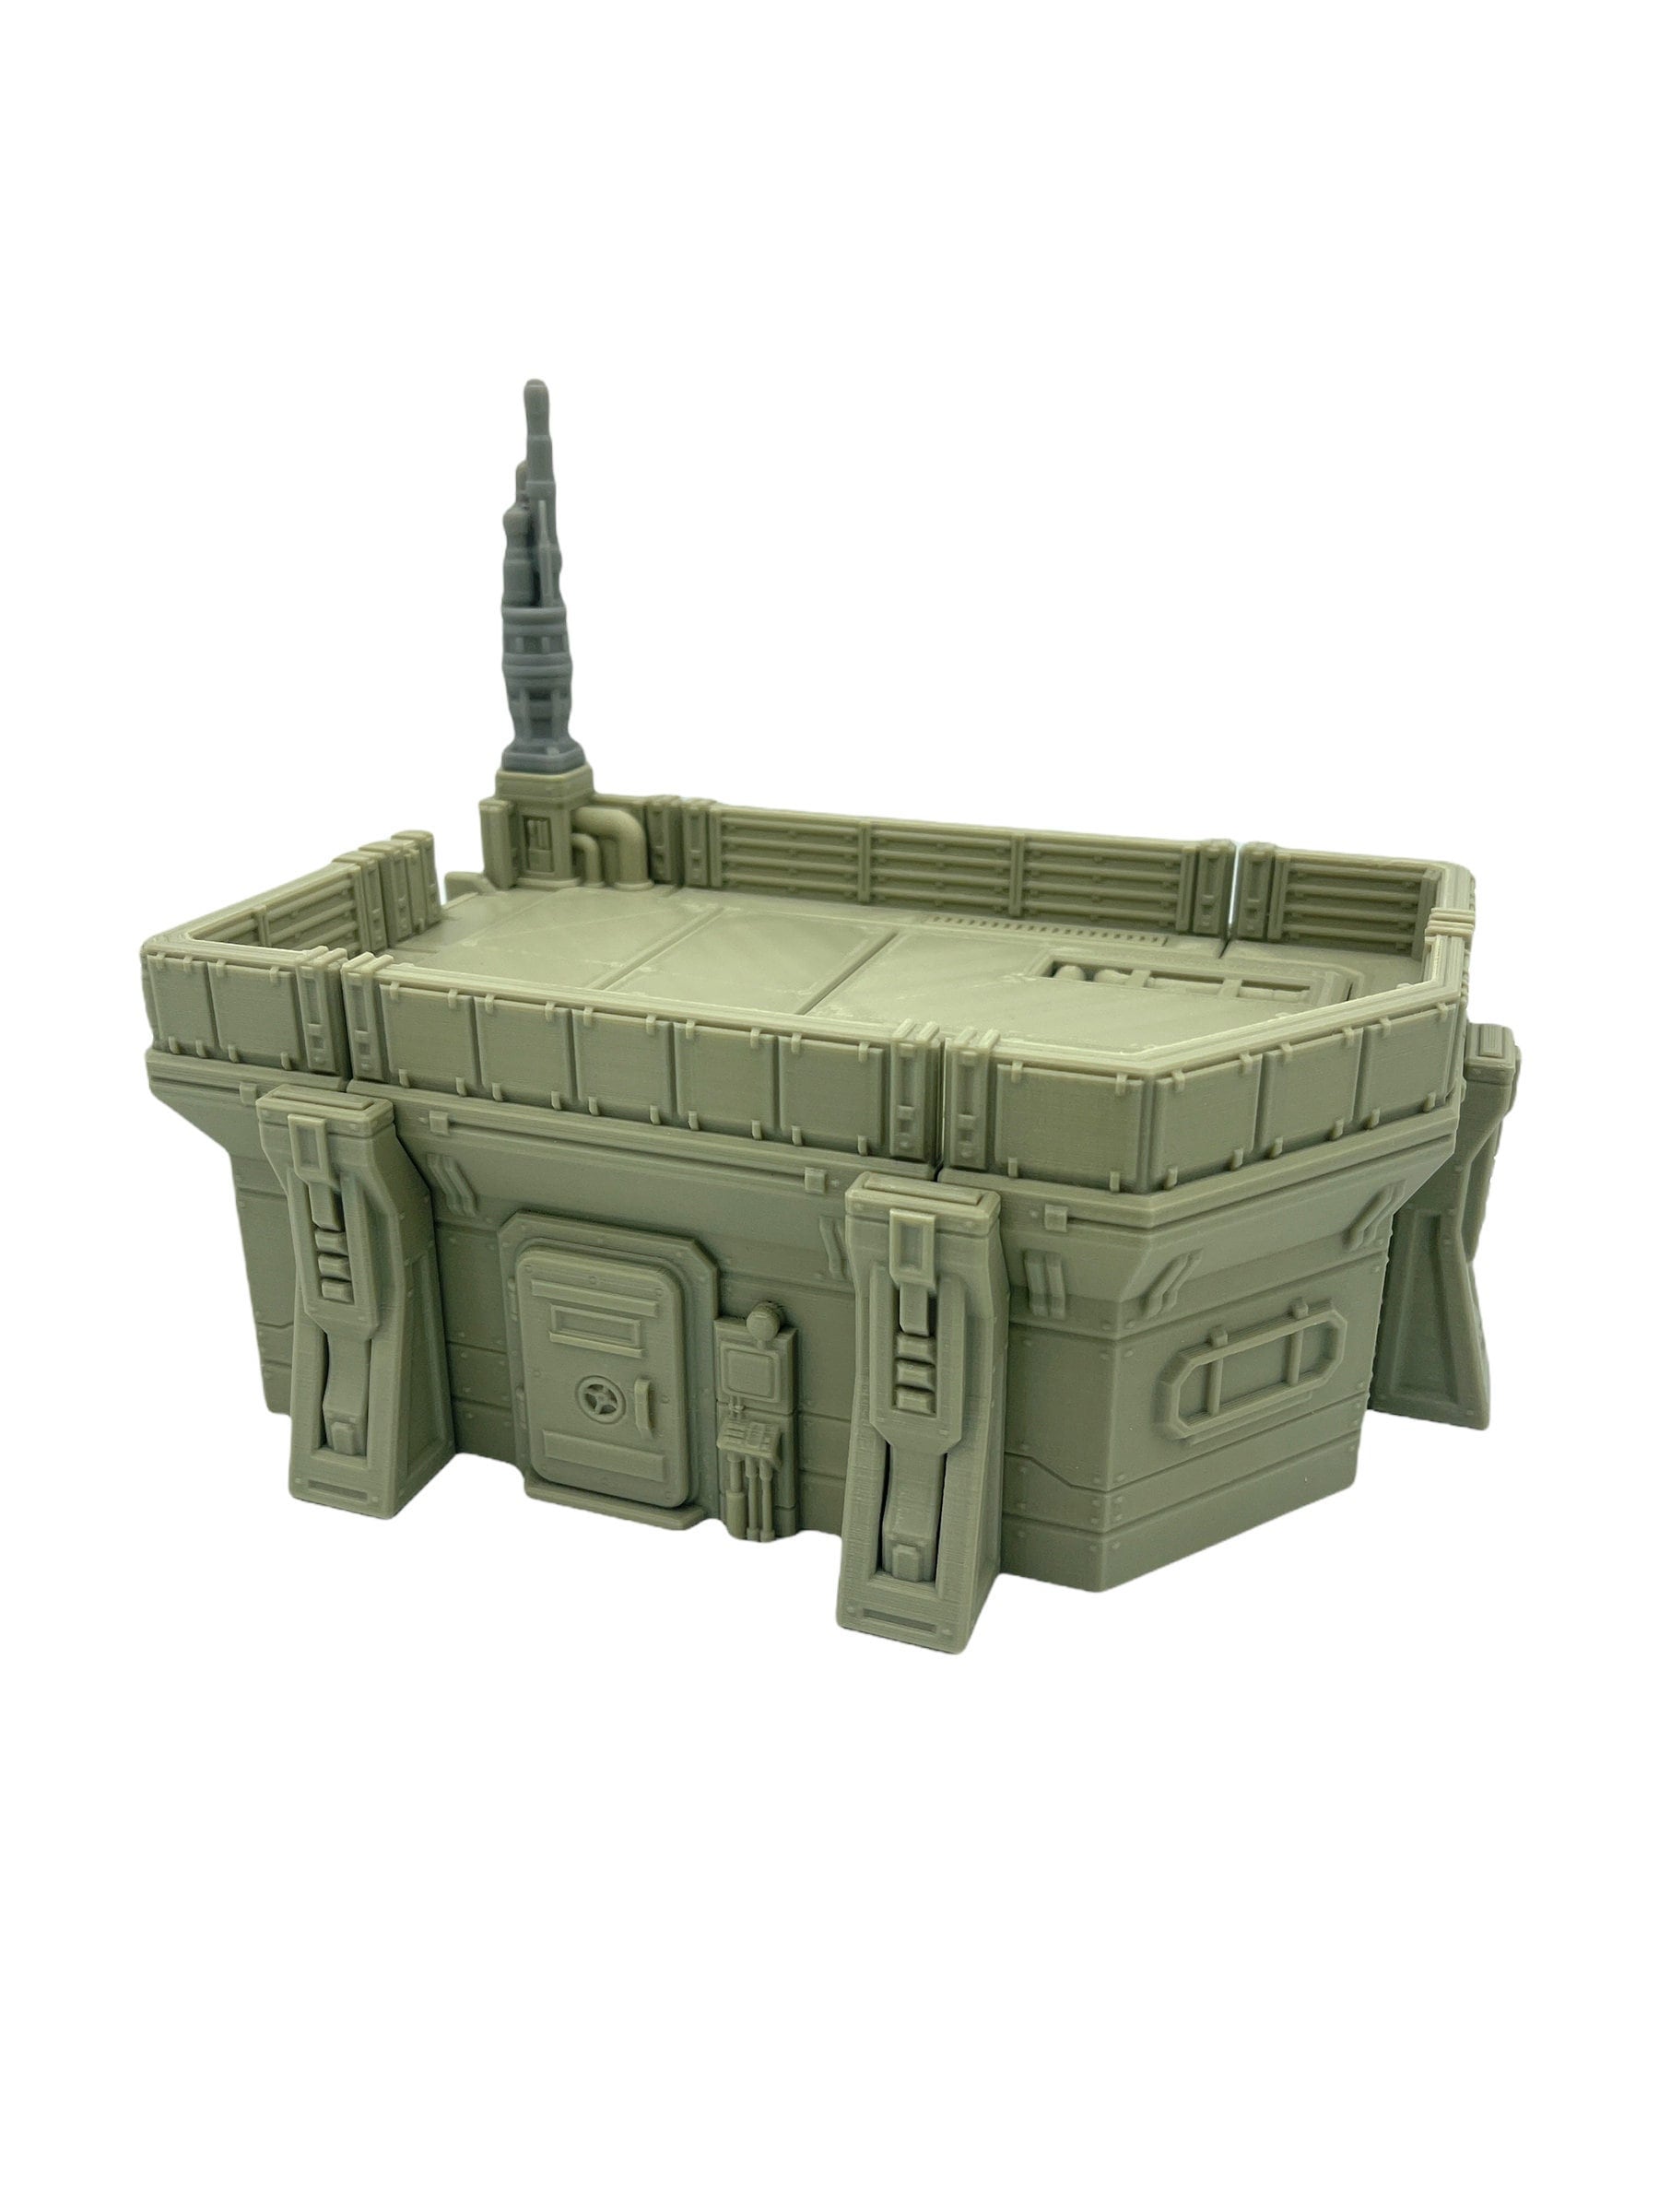 Outpost 21 - Cryolab / Forbidden Prints / RPG and Wargame 3d Printed Tabletop Terrain / Licensed Printer